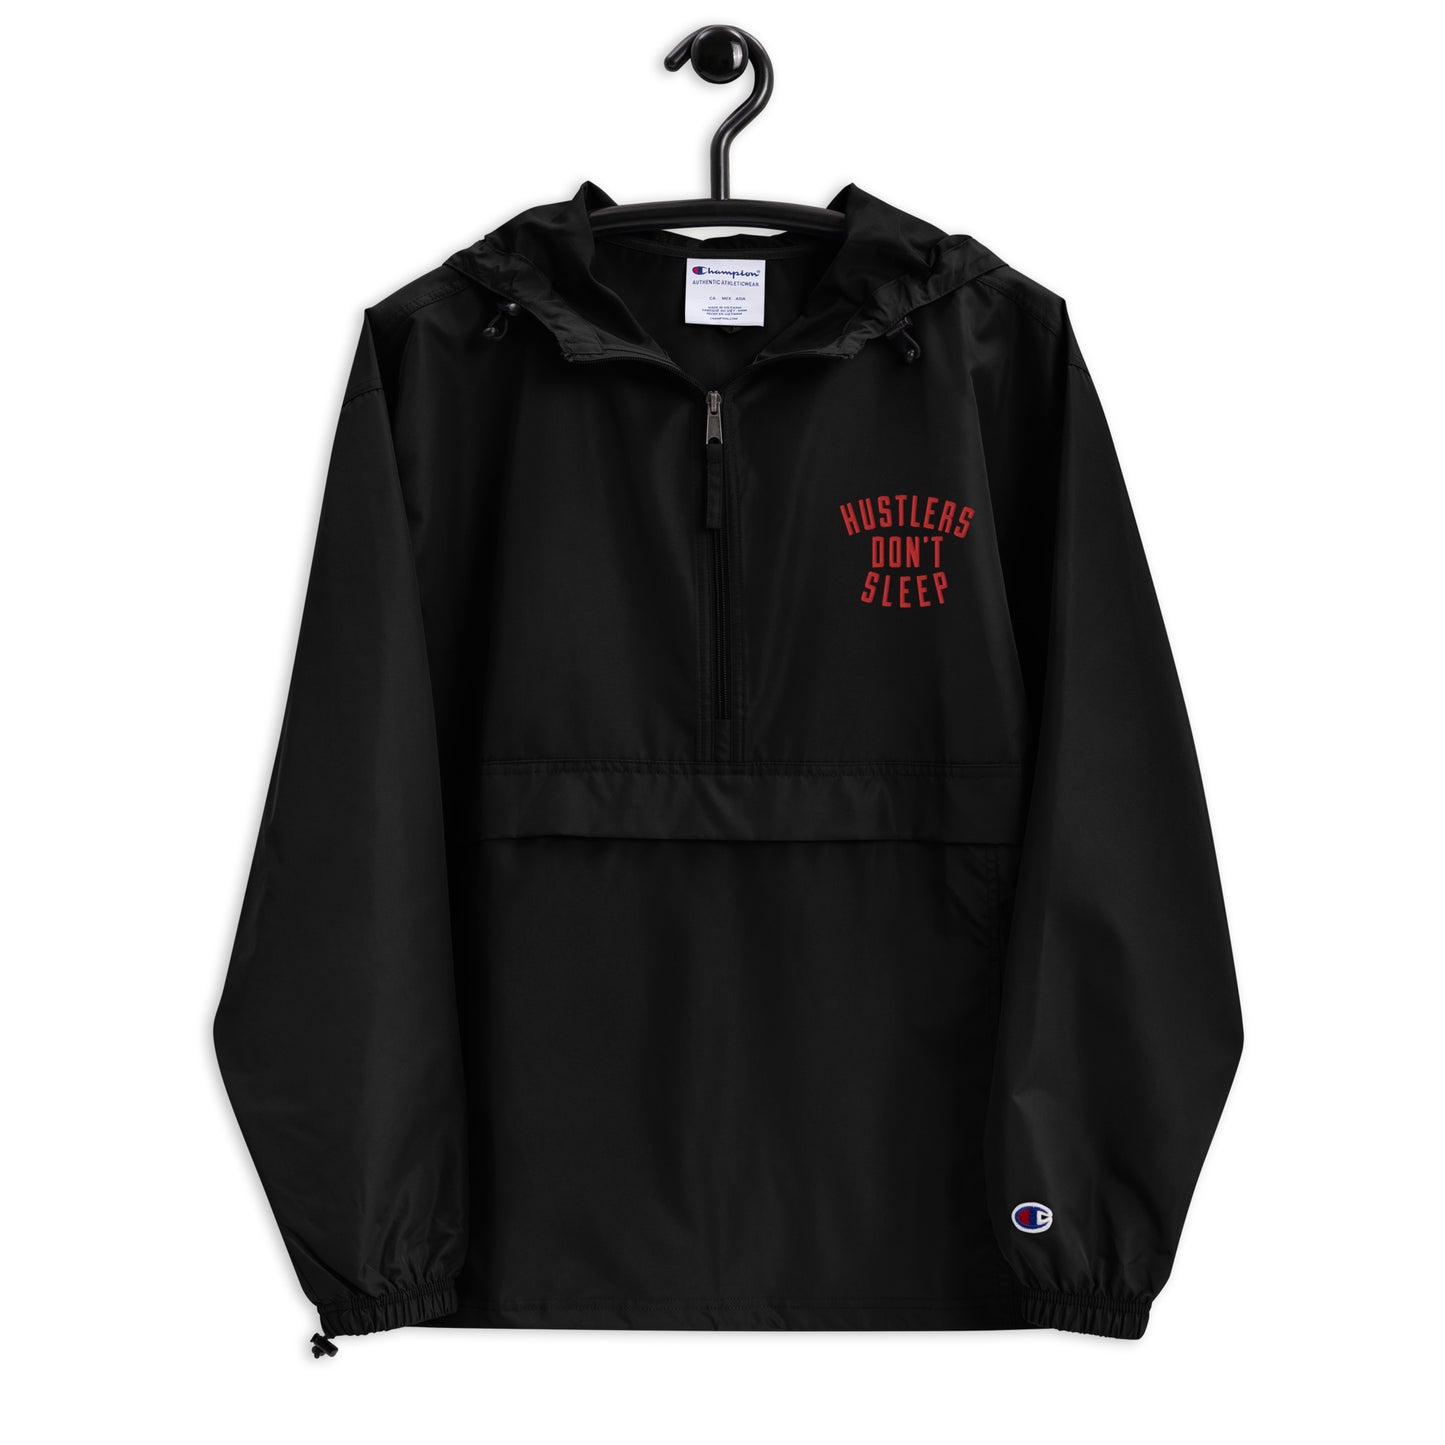 Hustlers don't sleep Embroidered Champion Packable Jacket